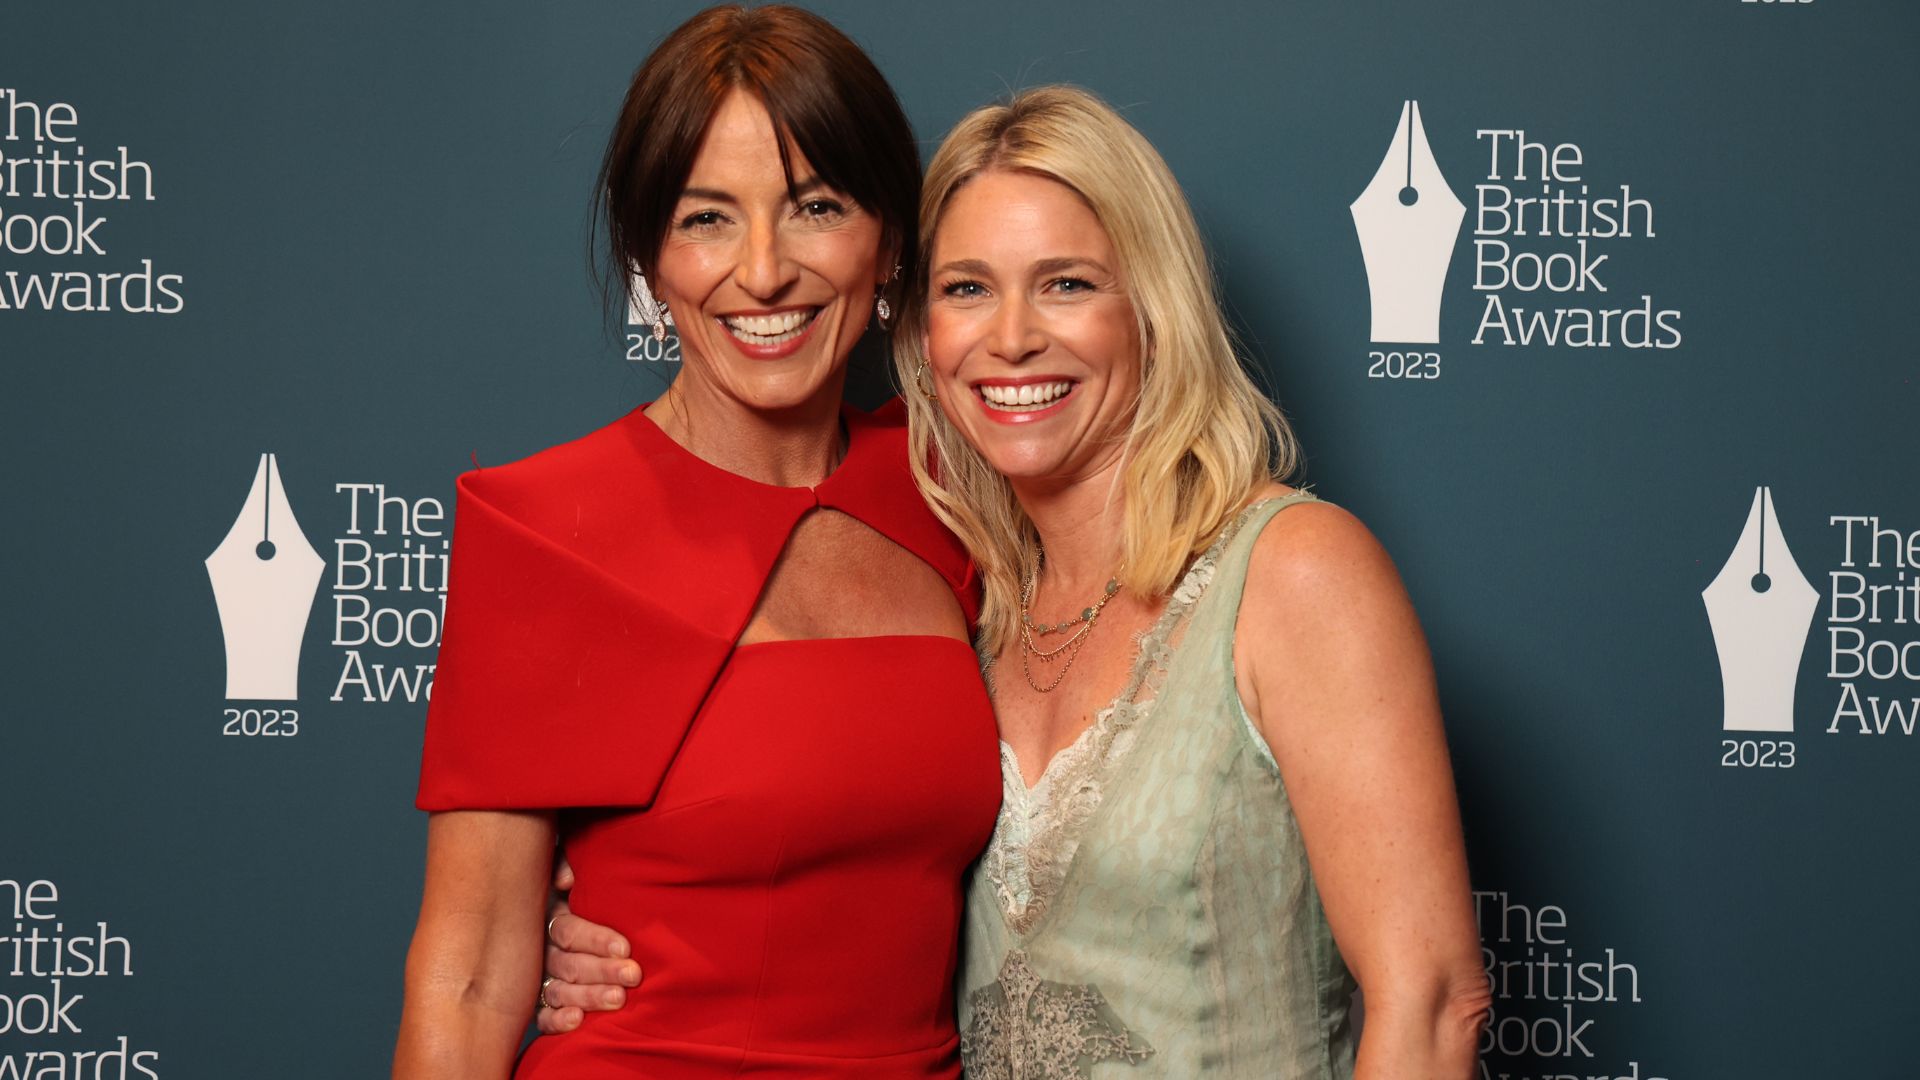 Davina McCall and Dr Naomi Potter win Book of the Year at The British Book Awards 2023 ceremony, at JW Marriott Grosvenor House London